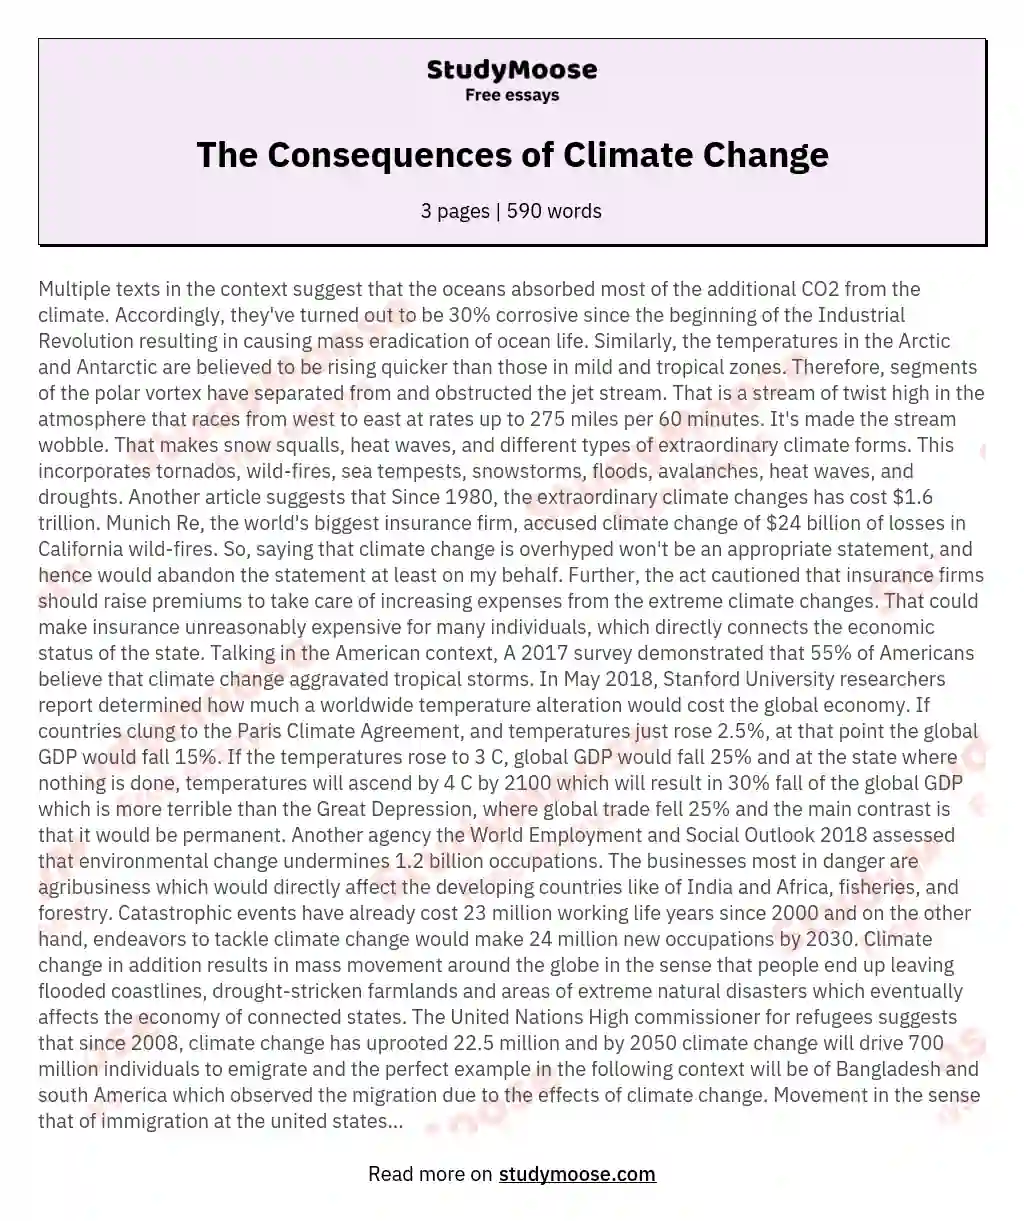 The Consequences of Climate Change essay